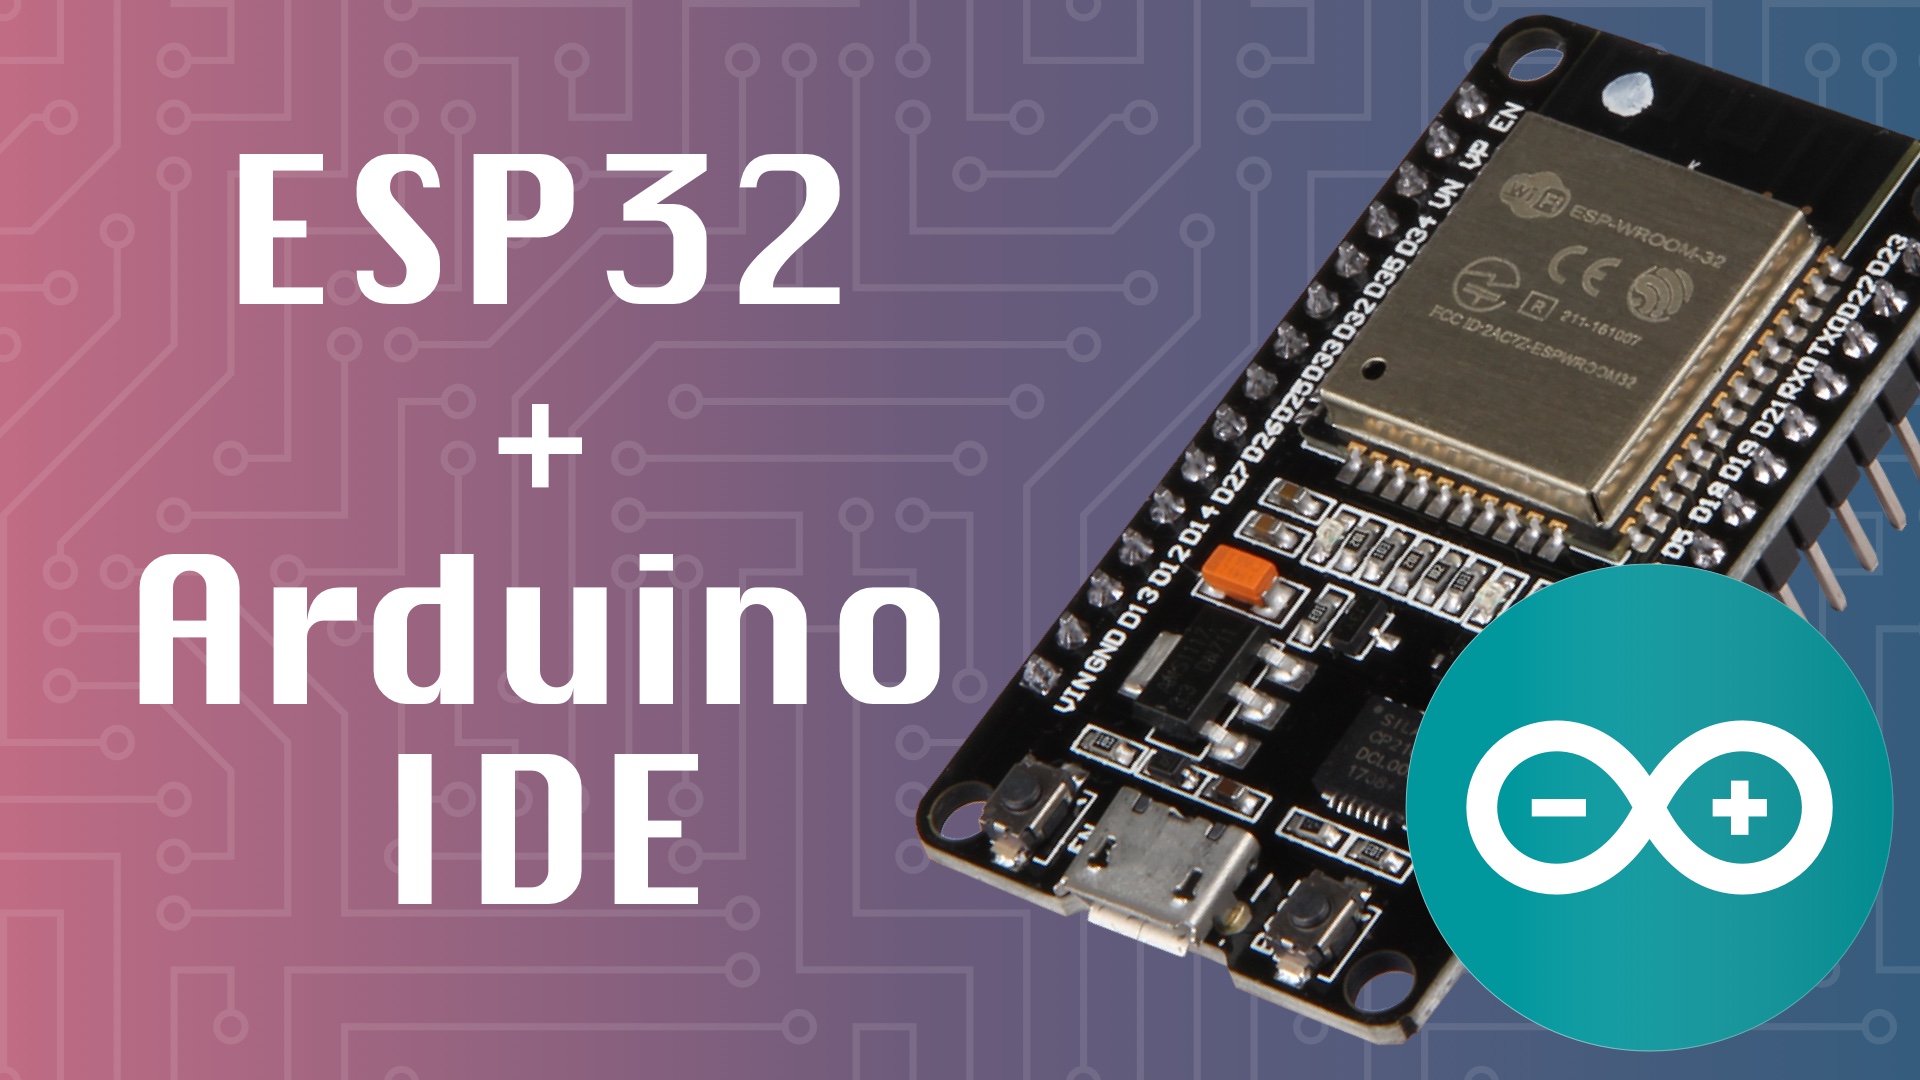 Thumbnail for post 'Why ESP32's Are the Best Microcontrollers'